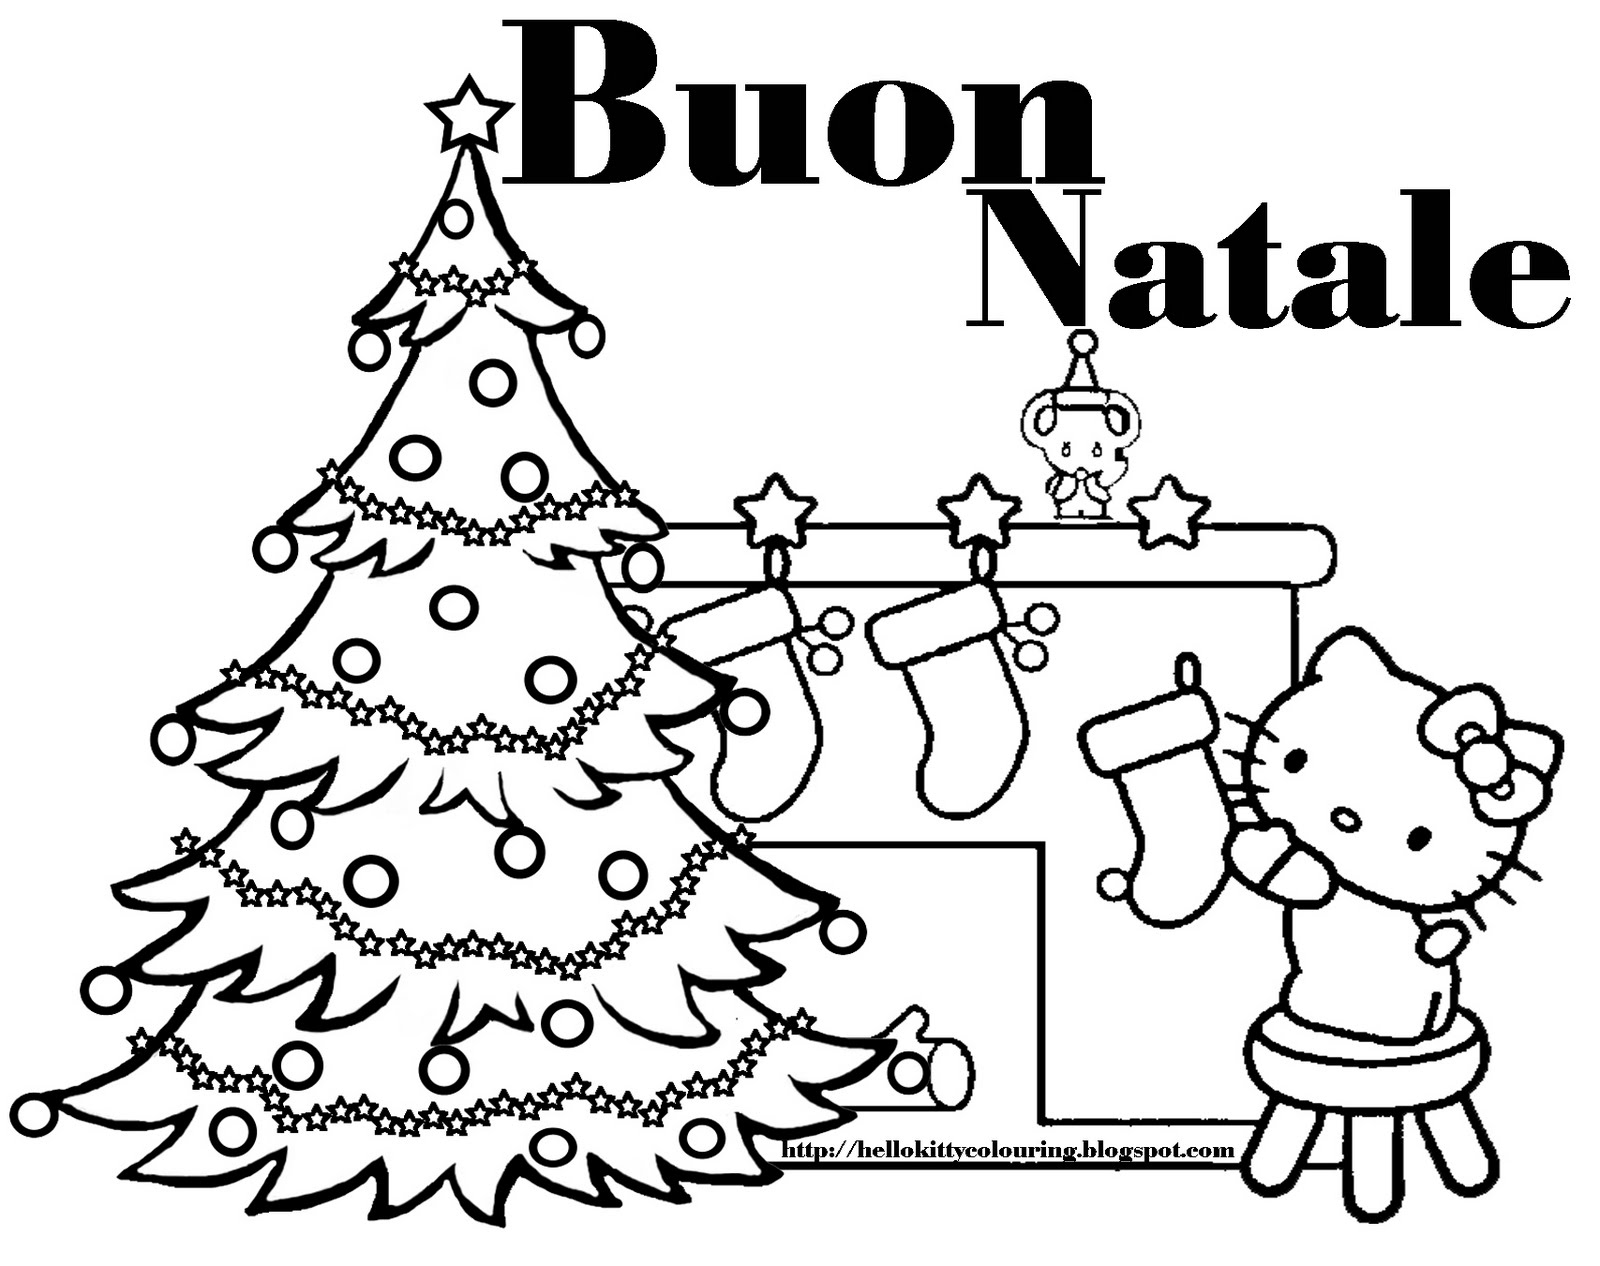 Hello Kitty Christmas Coloring Pages 2  Hello Kitty Forever